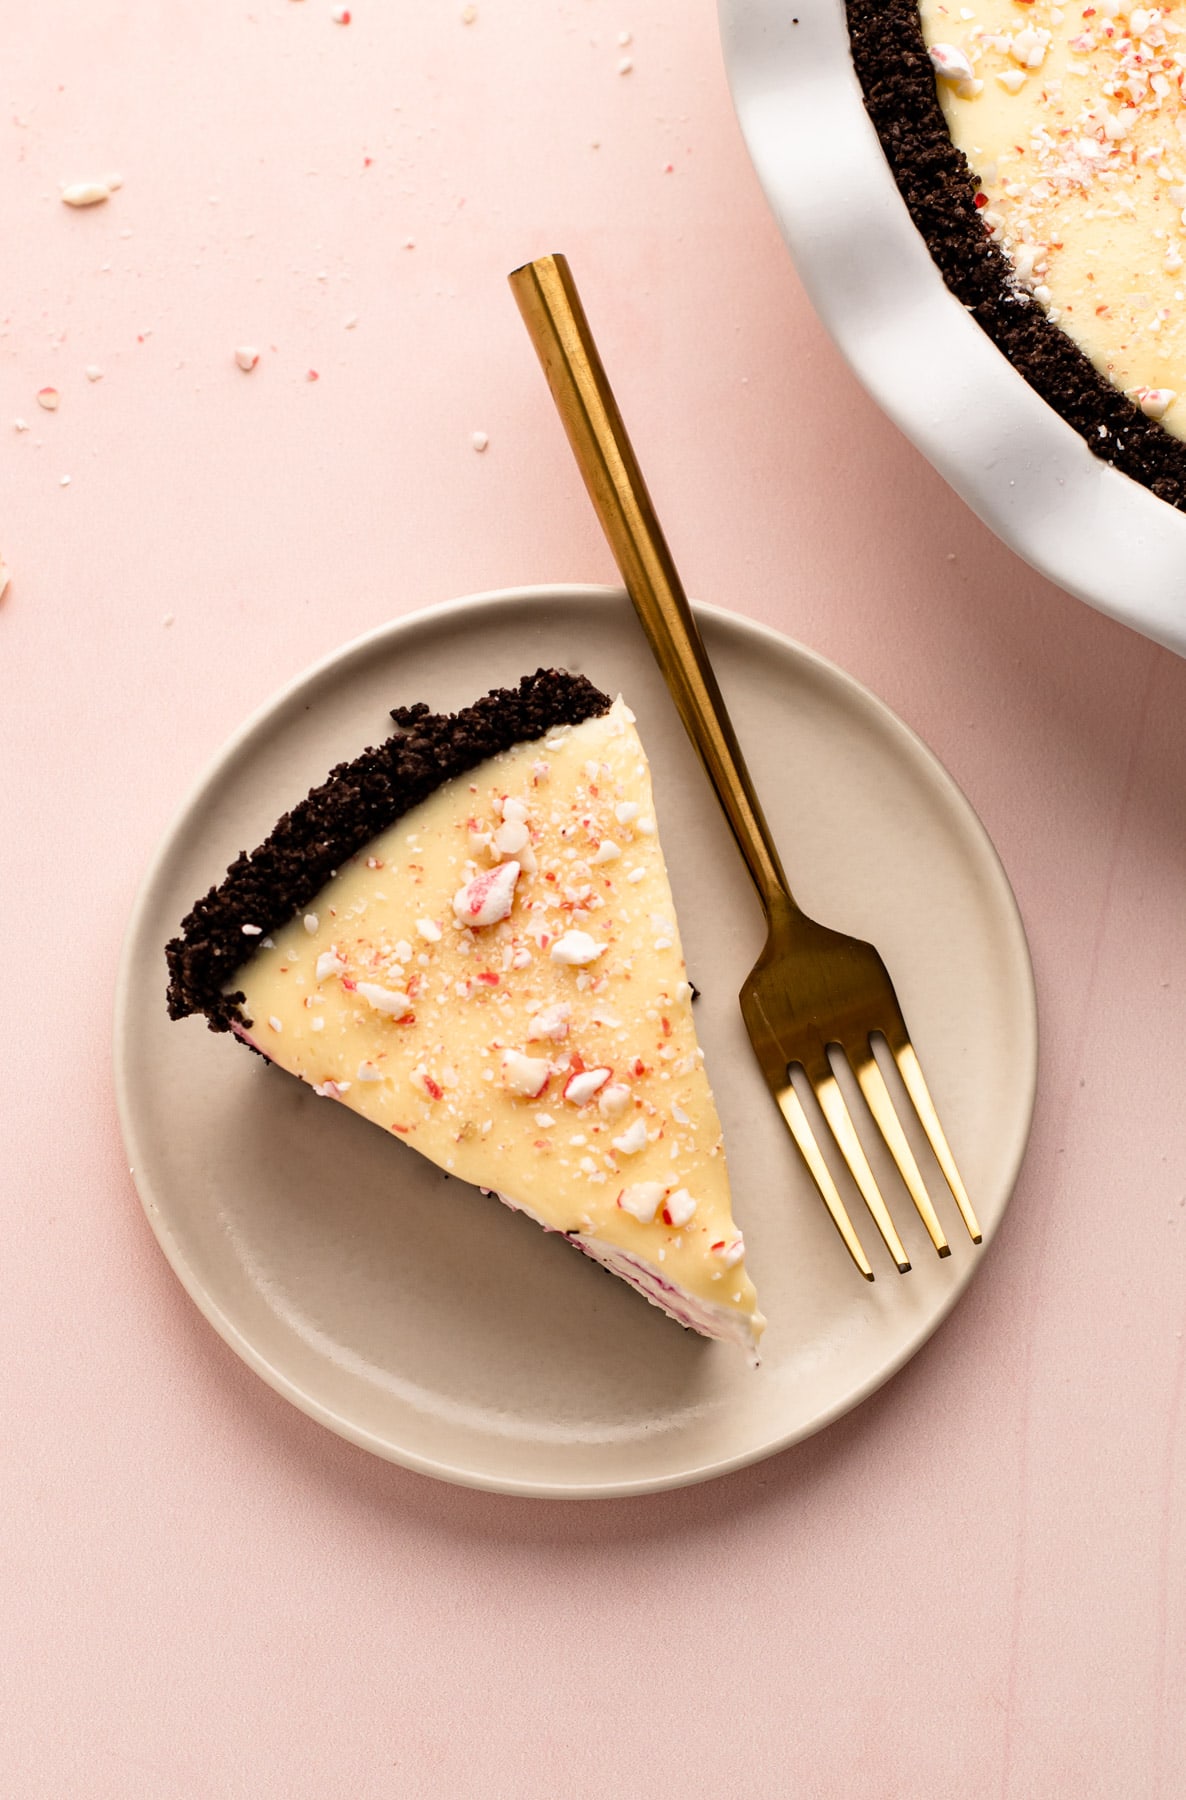 A slice of candy cane pie.